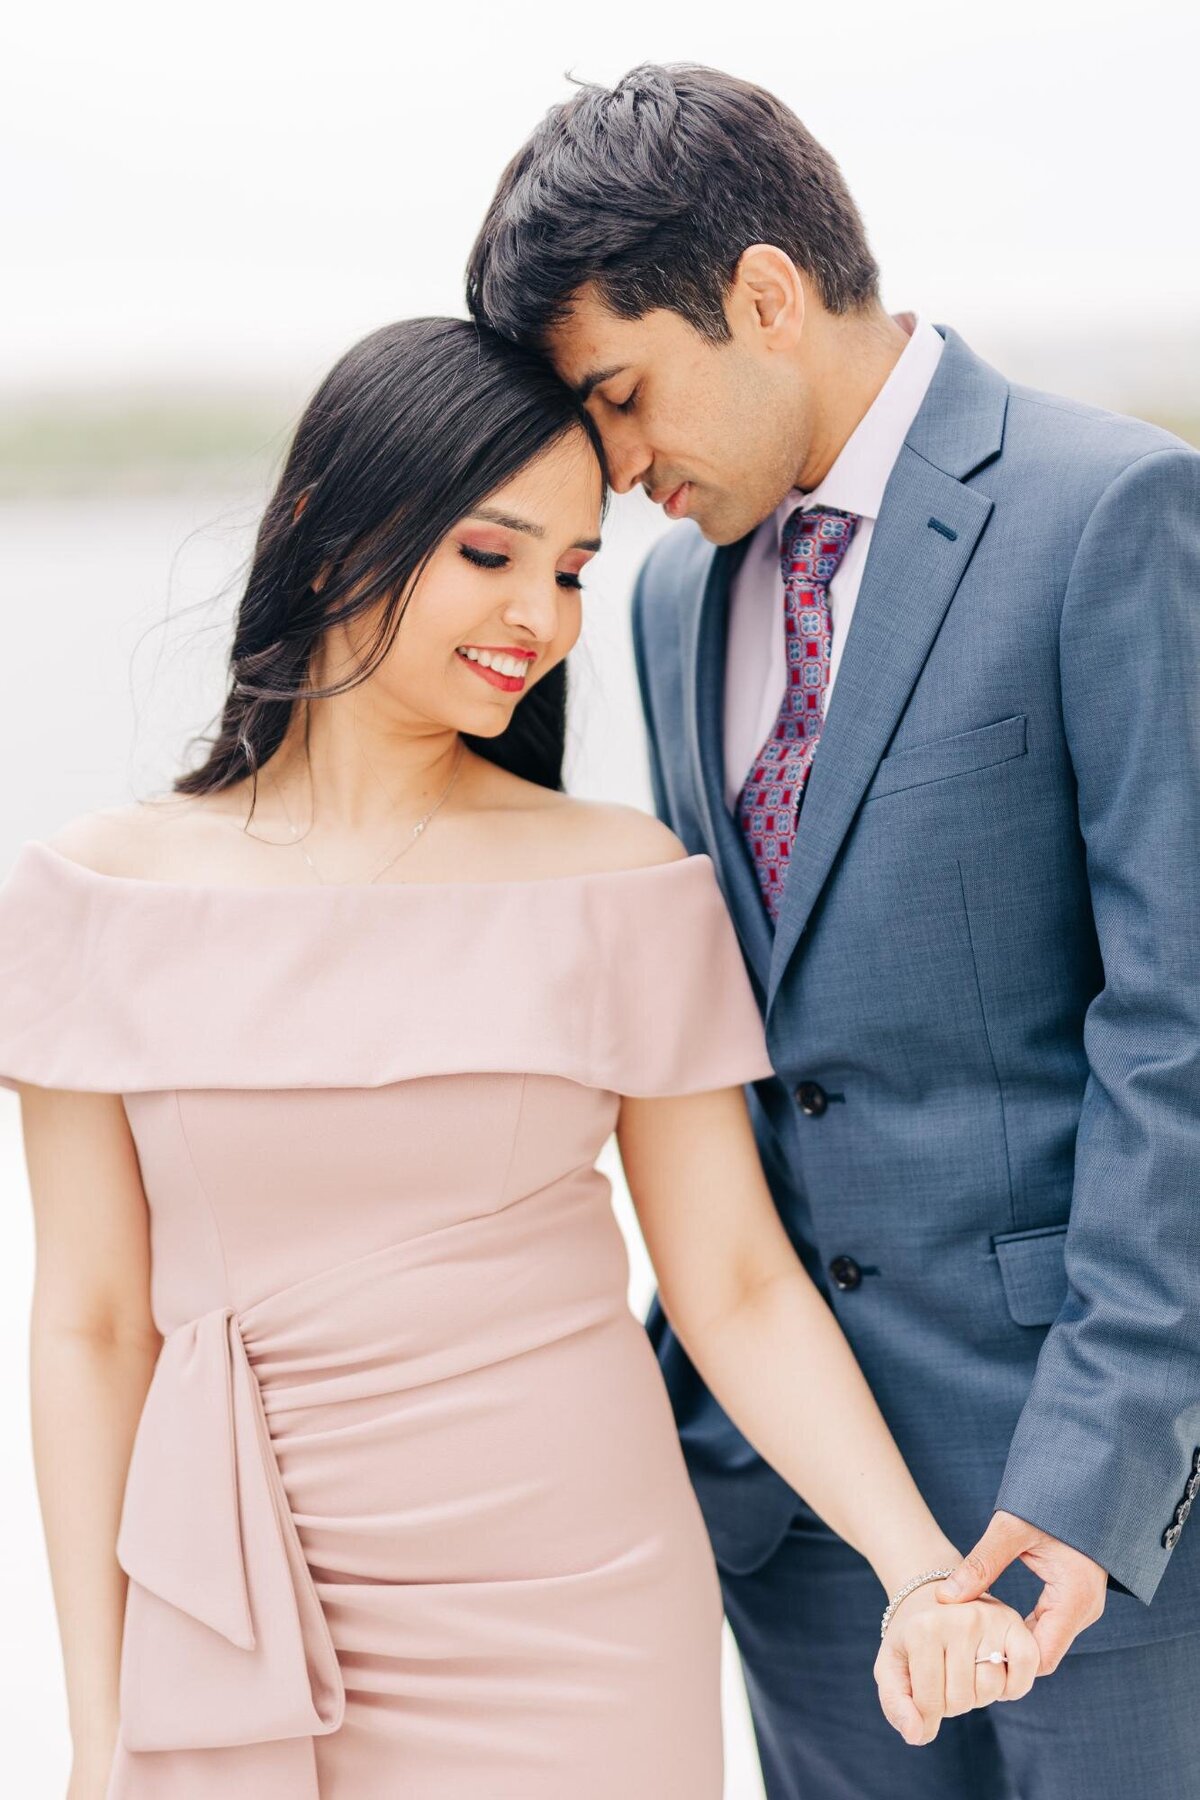 A couple dressed formally, the man in a grey suit and the woman in a pink off-shoulder dress, stand close together, smiling gently and holding hands.